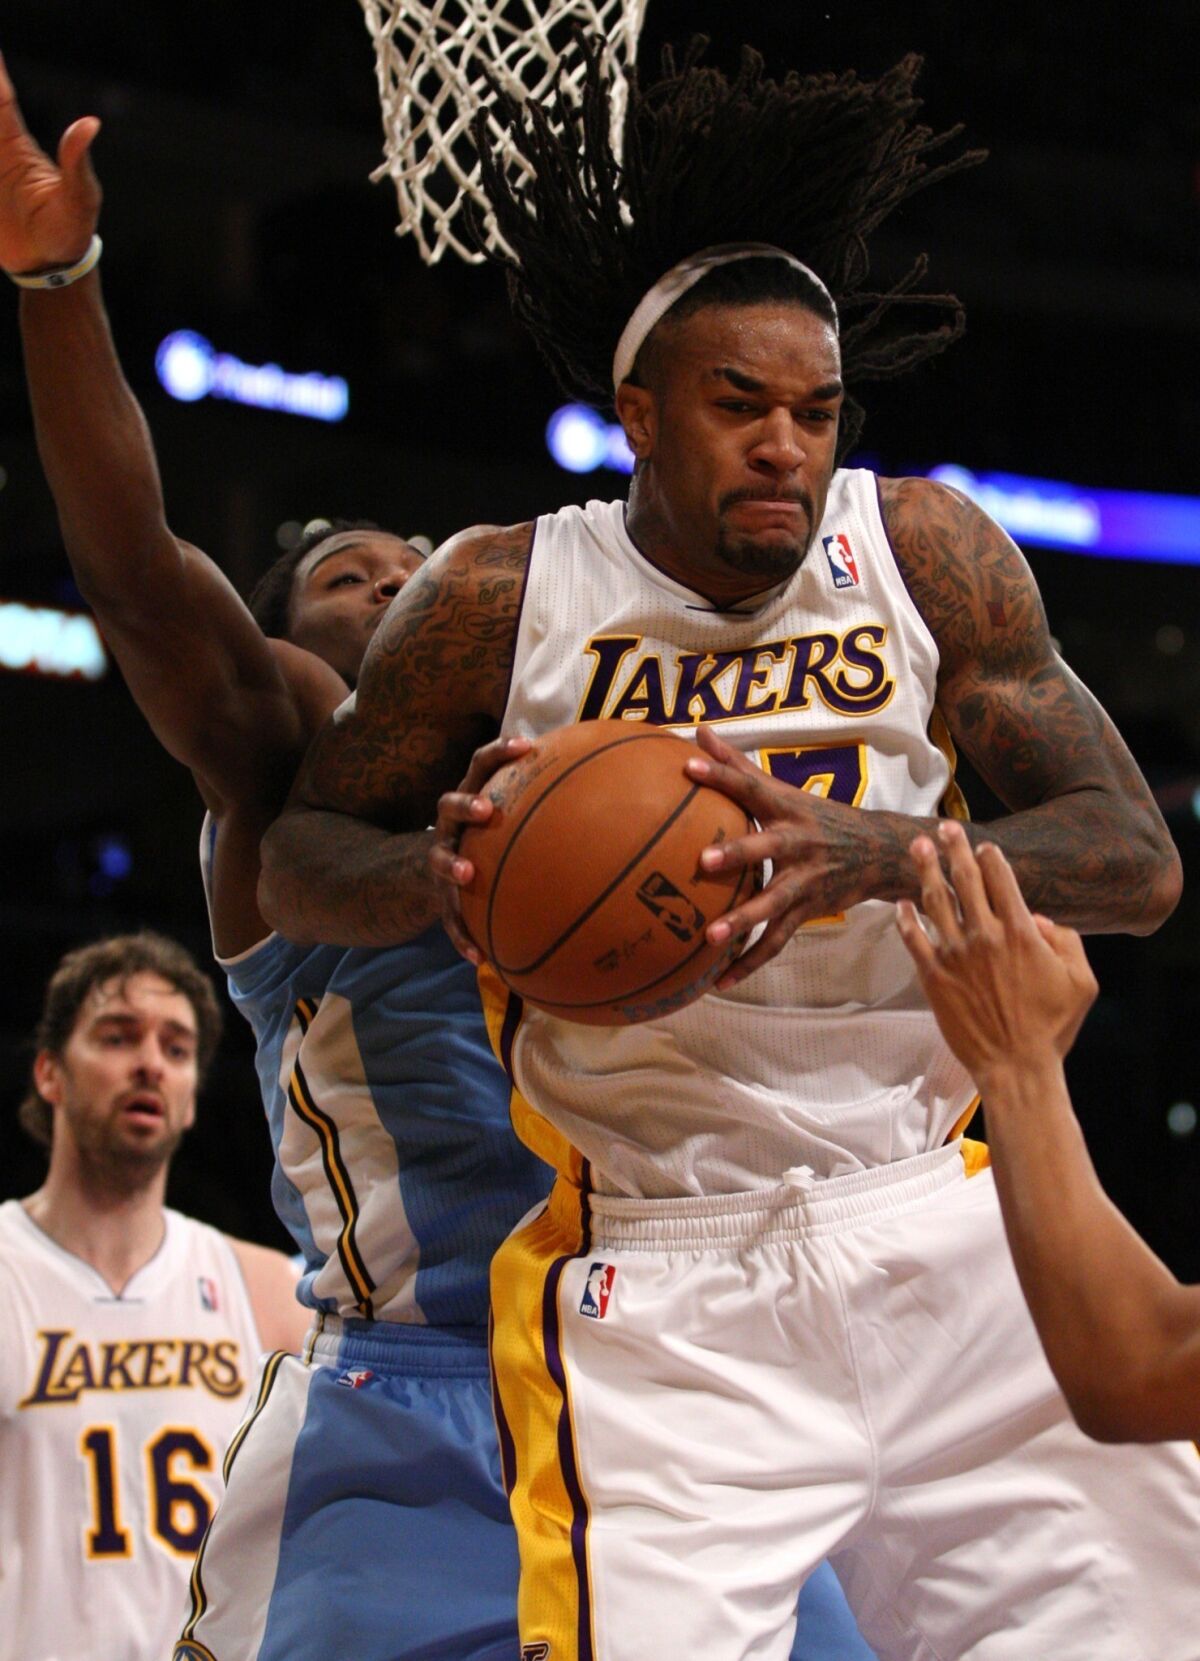 Jordan Hill has suffered a season-ending injury to his hip and will not return for the Lakers.